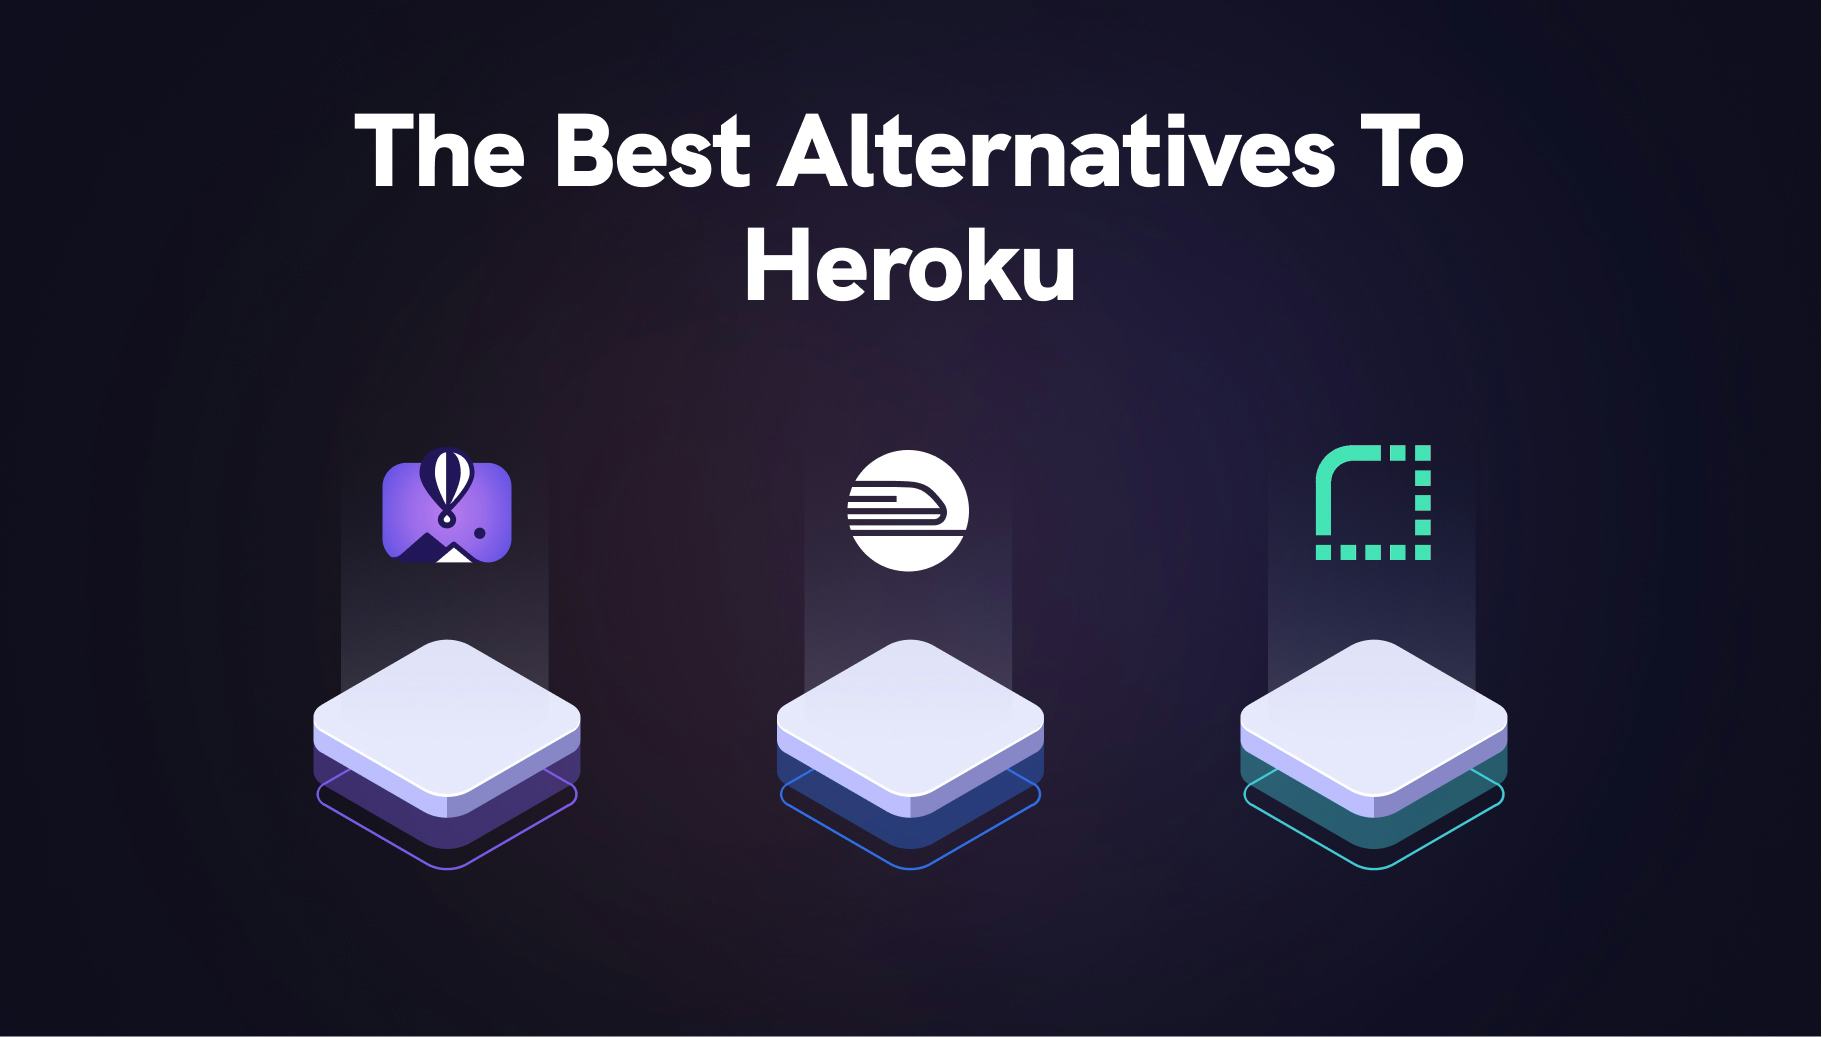 Heroku discontinued their free tier - what are the top 3 best alternatives? - Qovery